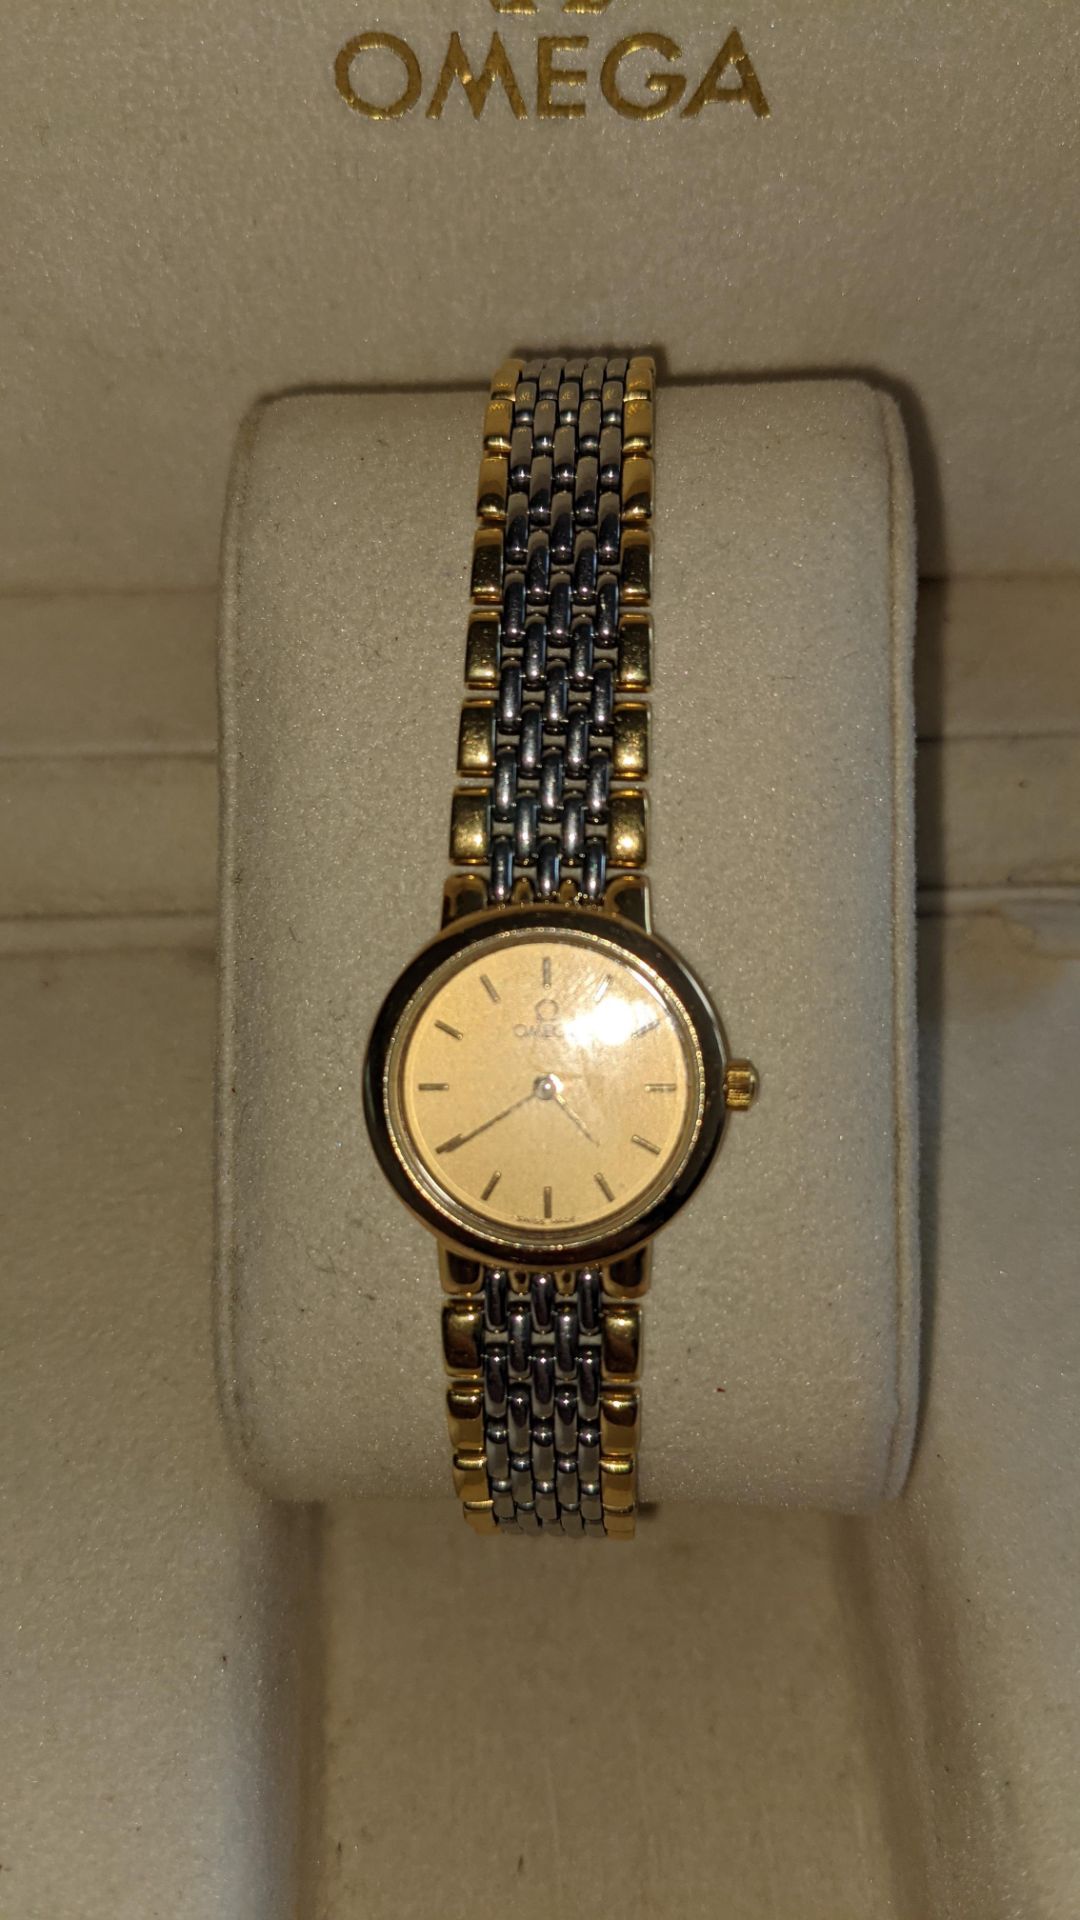 Omega De Ville lady's wristwatch in 2-tone finish including Omega red box & white cardboard outer bu - Image 4 of 17